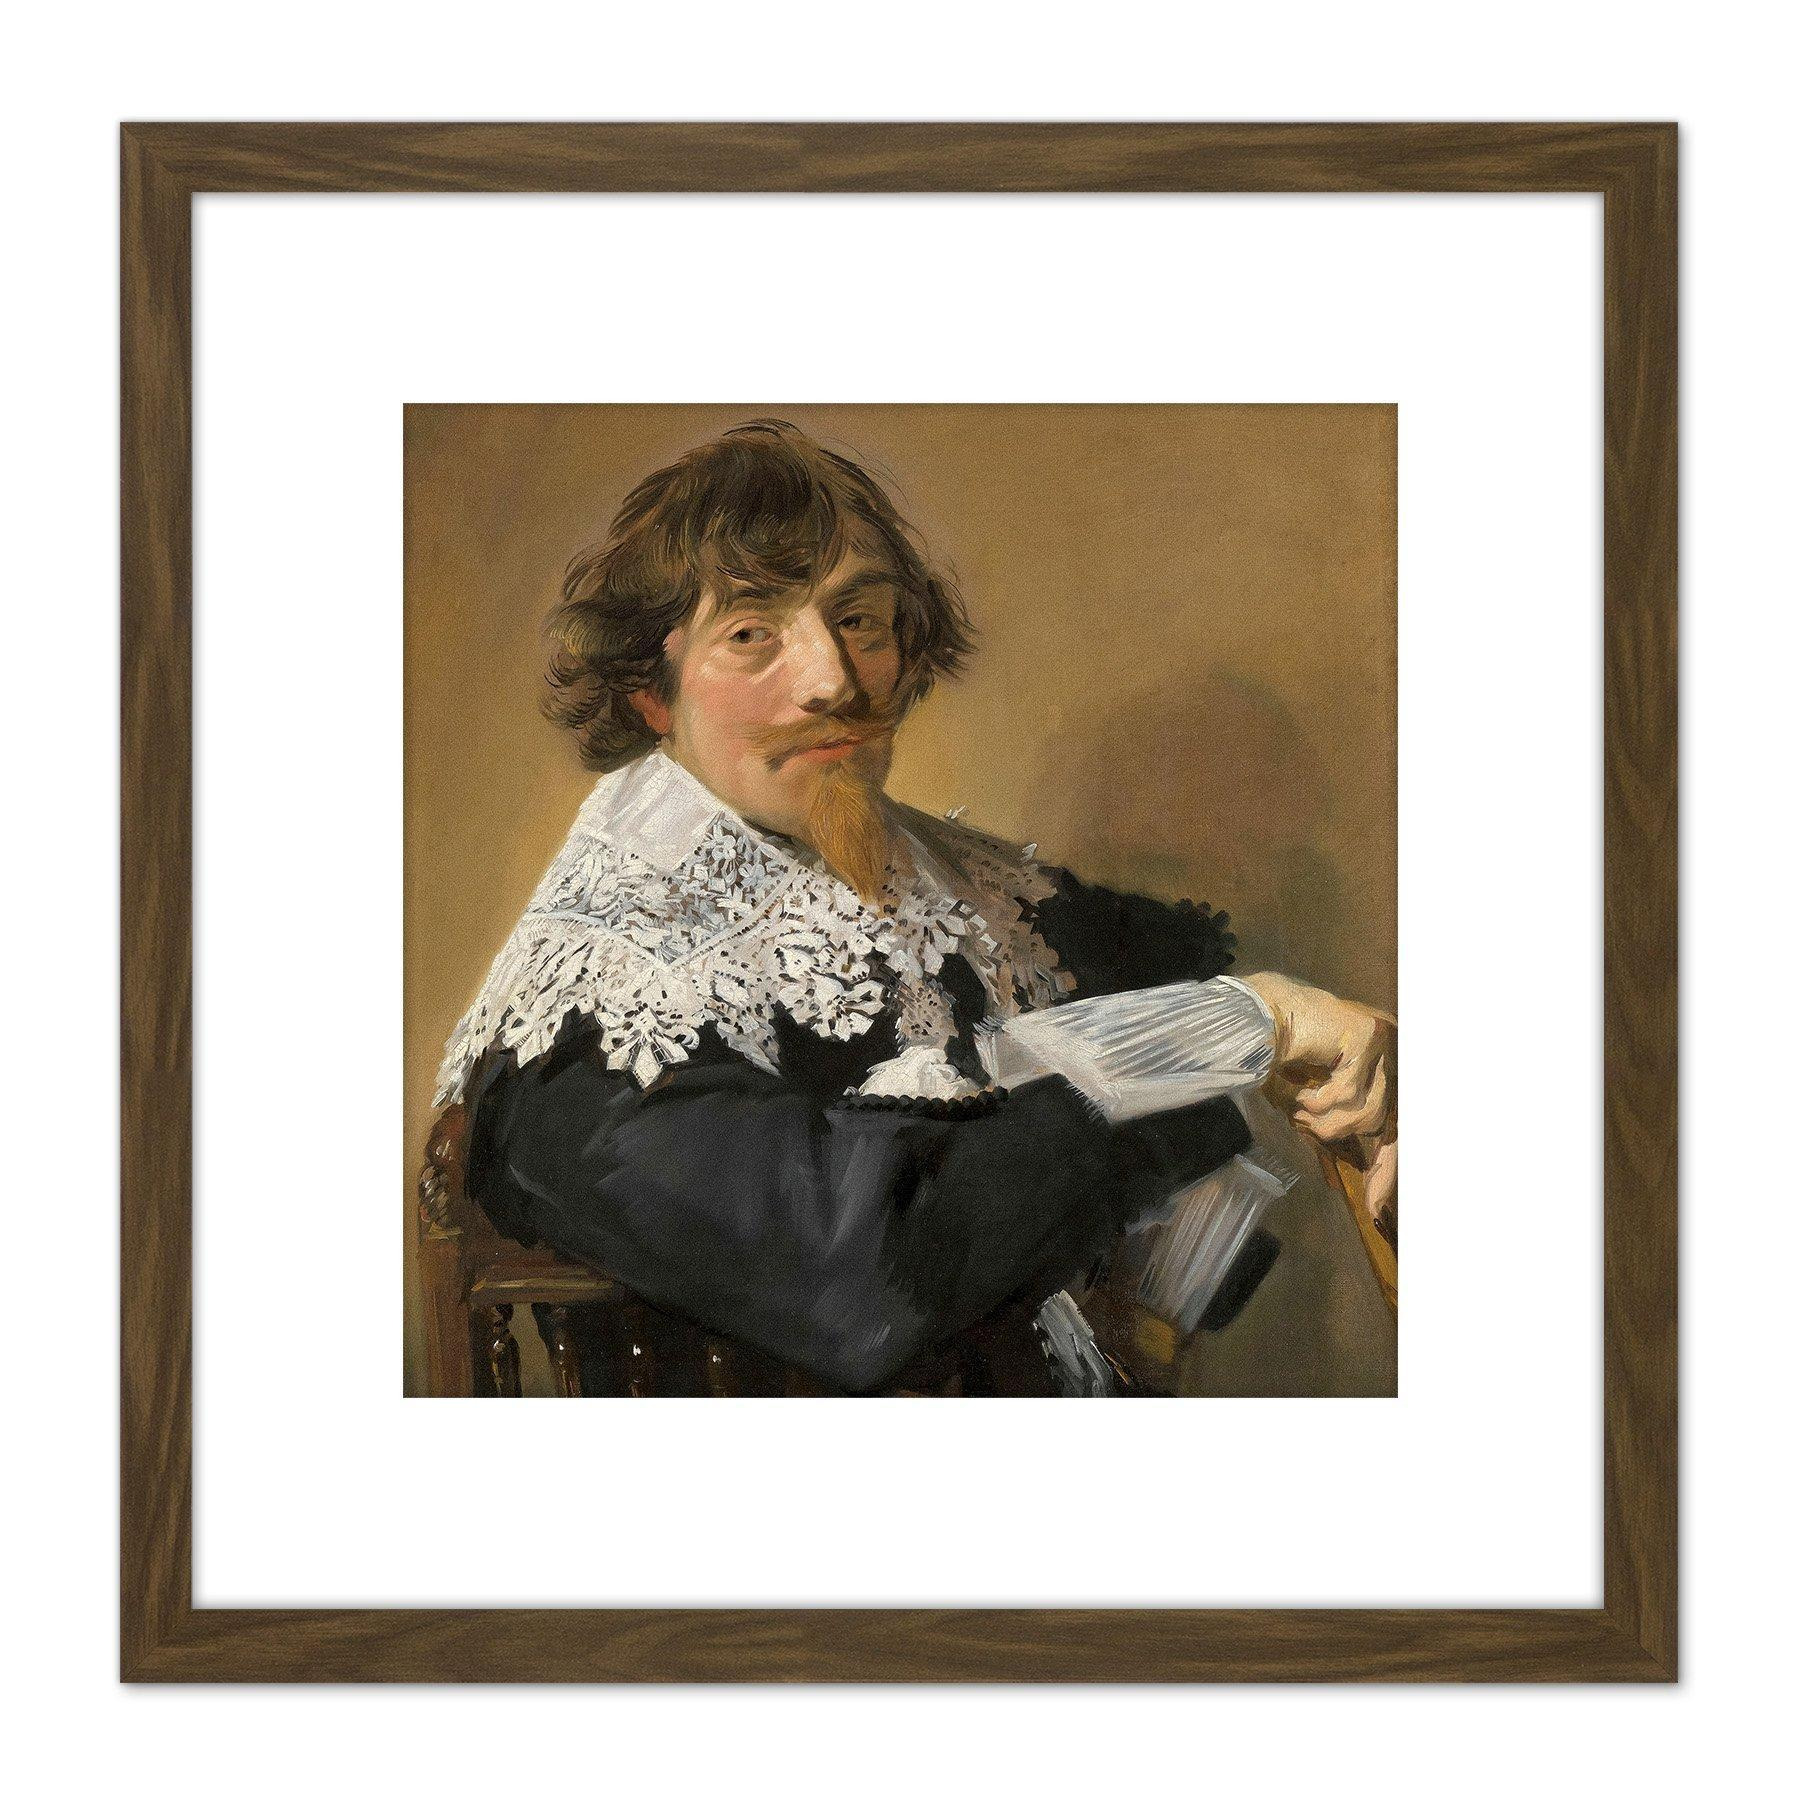 Frans Hals Portrait Of A Man Painting 8X8 Inch Square Wooden Framed Wall Art Print Picture with Mount - image 1